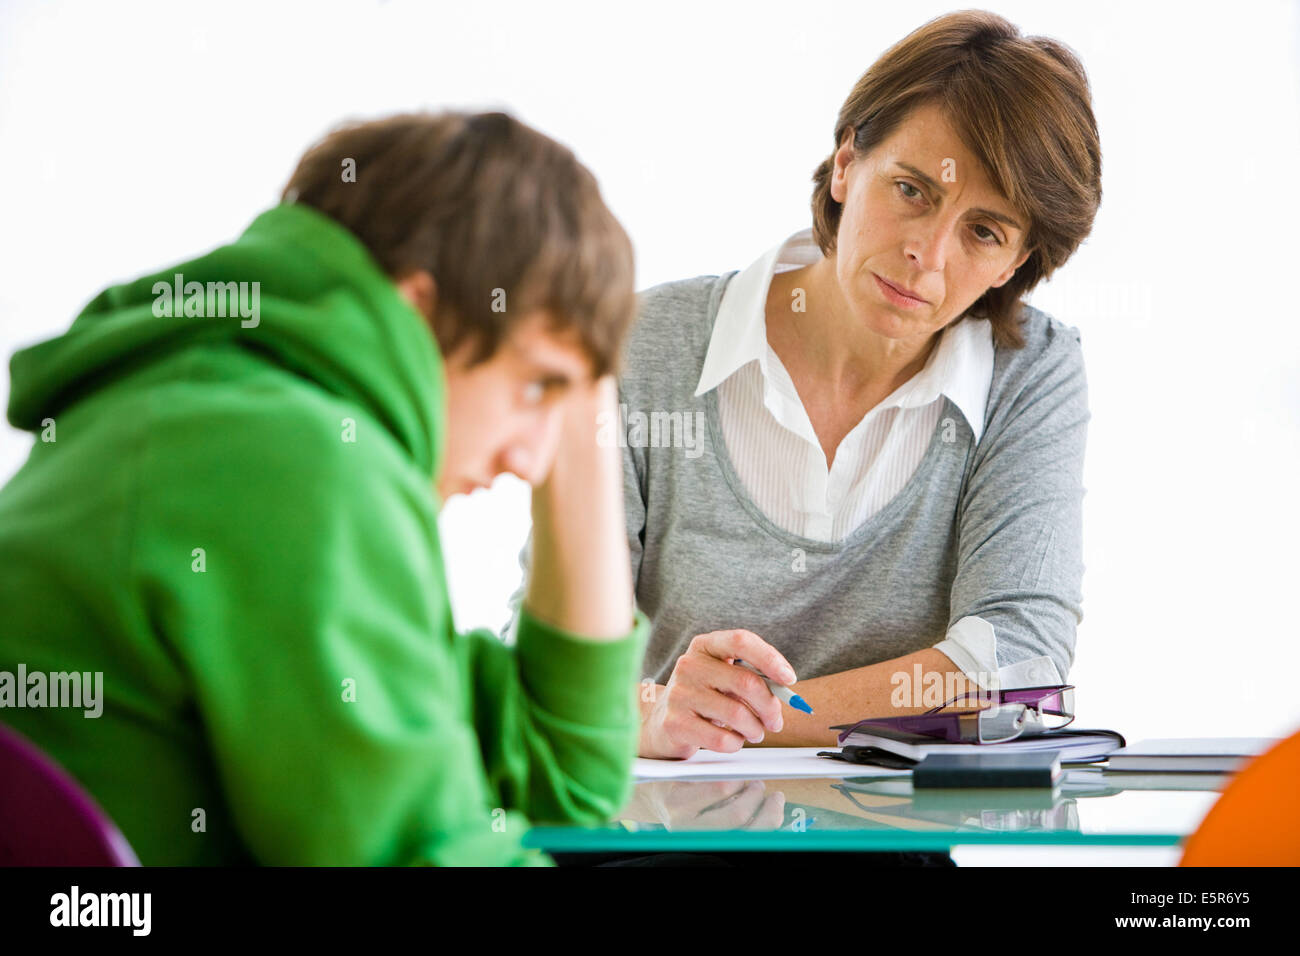 Teenage boy talking with specialist or teacher. Stock Photo